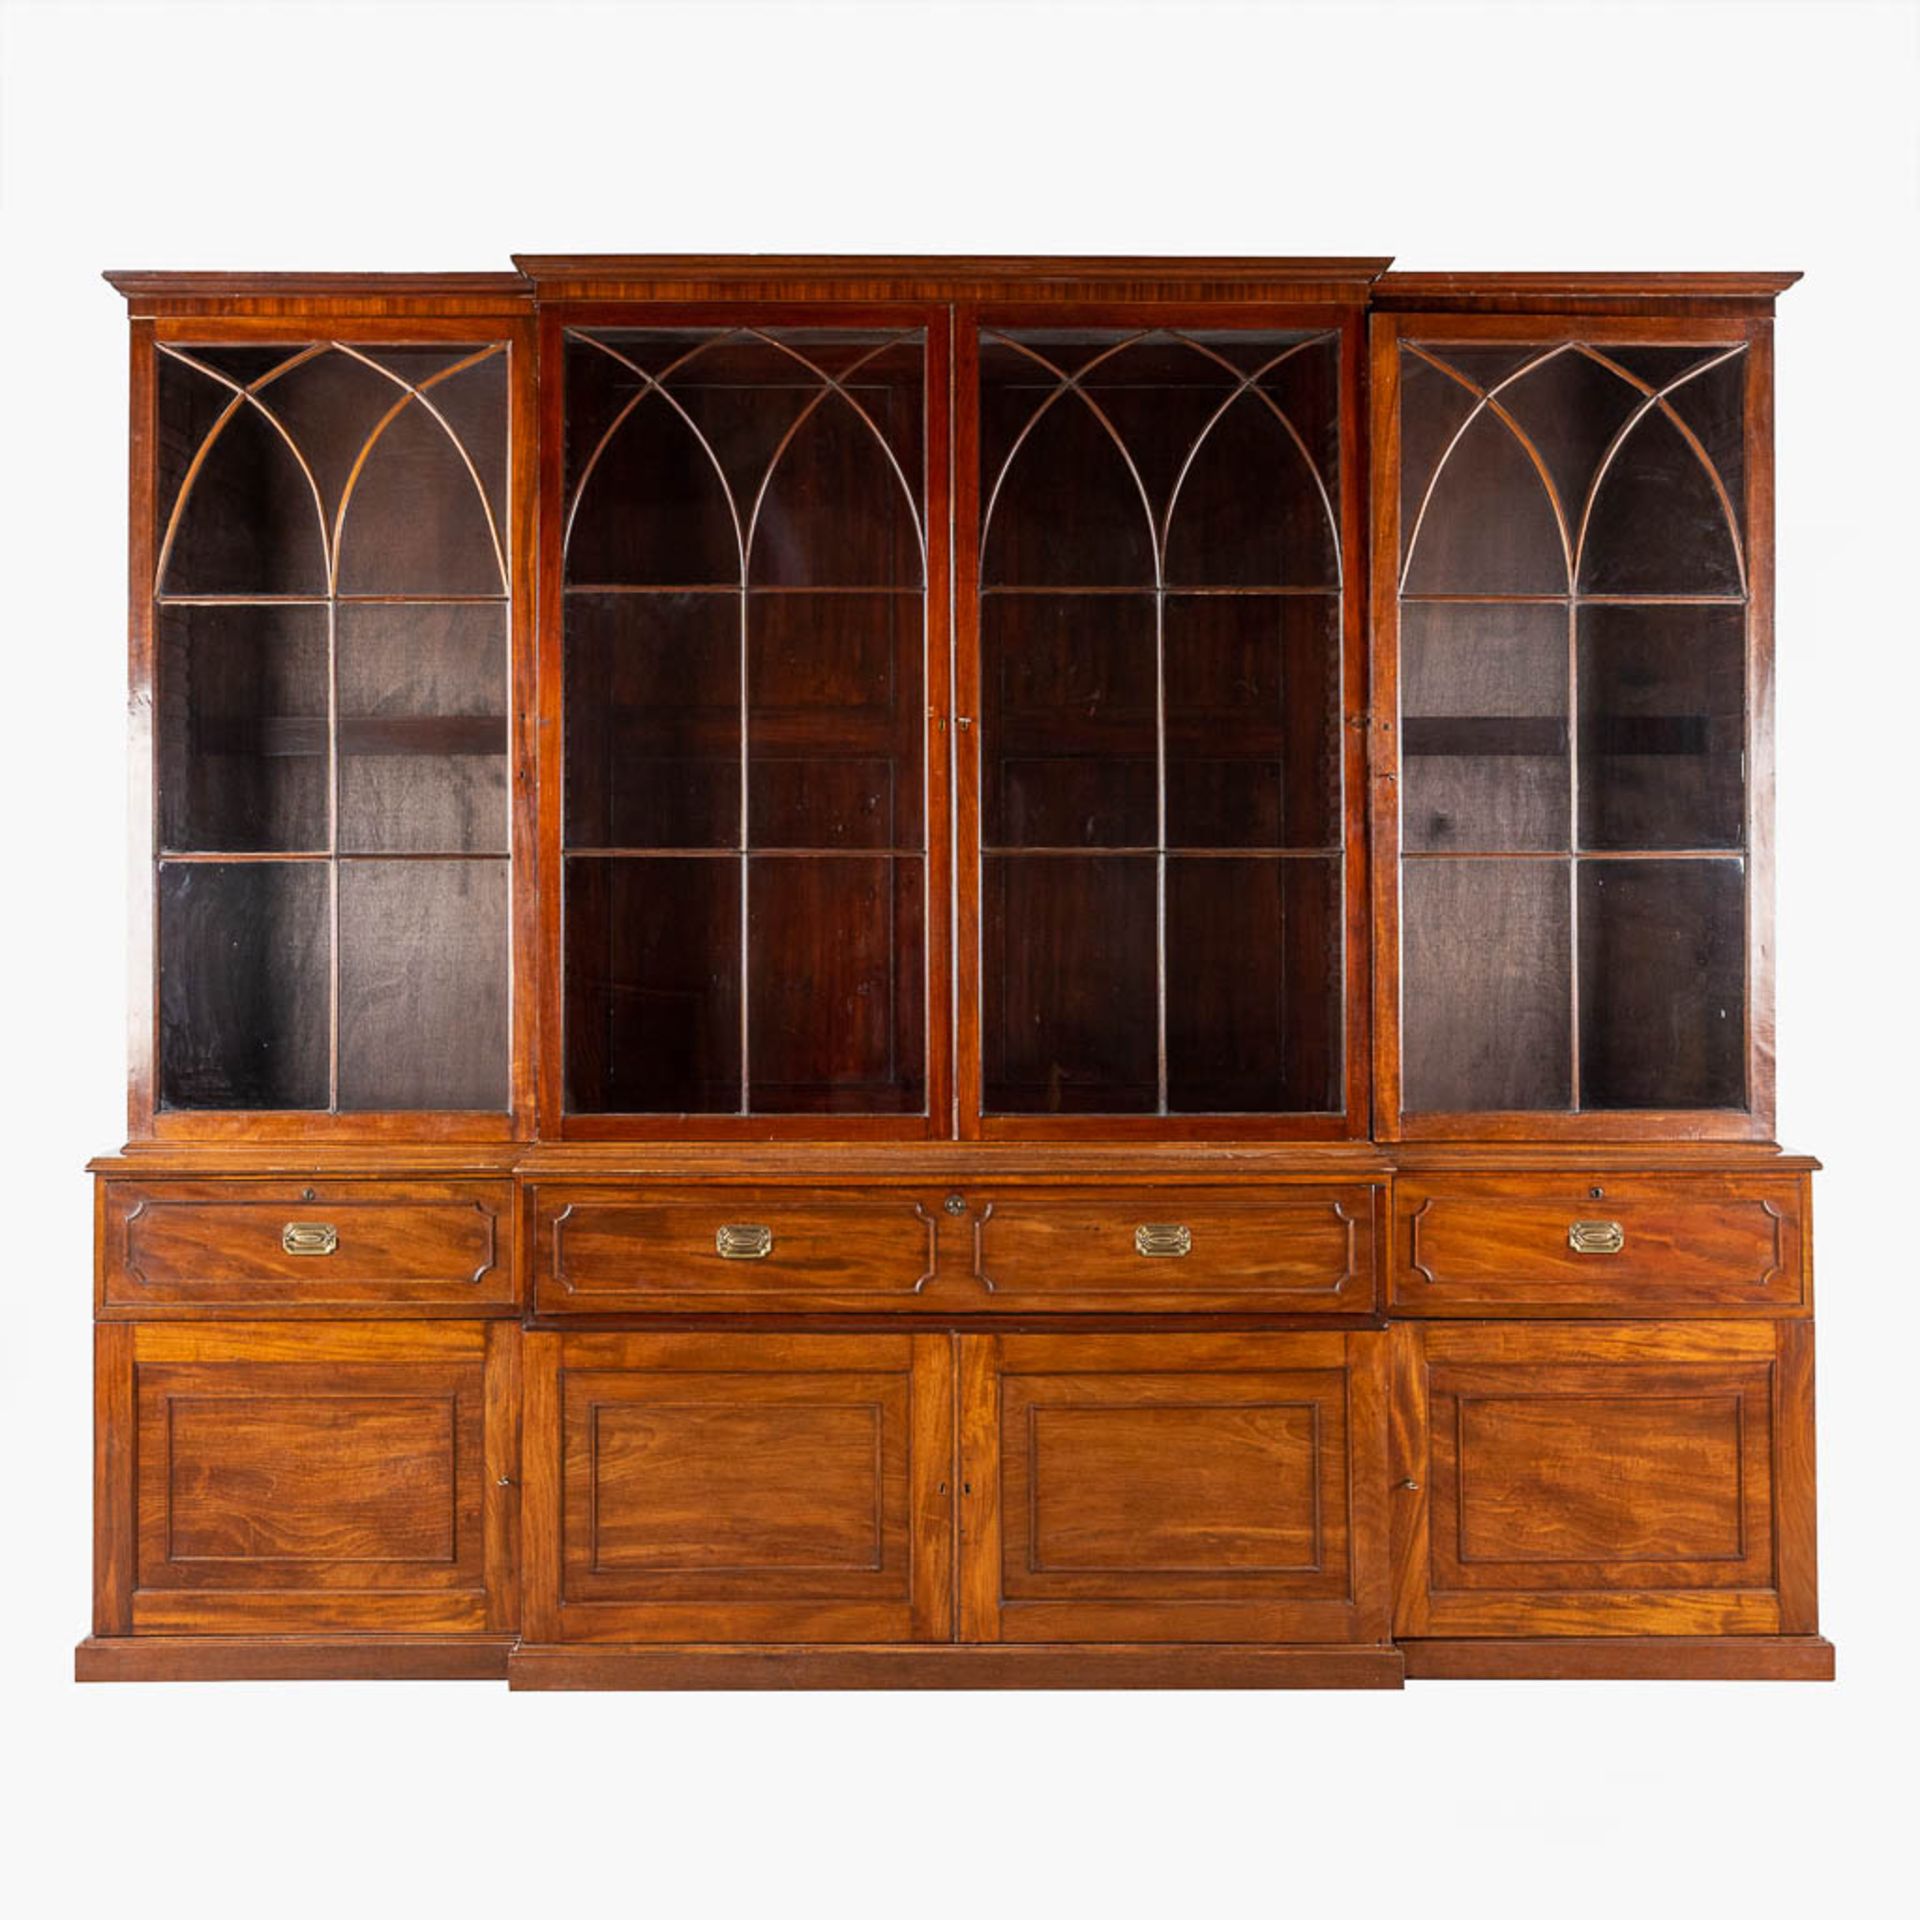 A monumental and antique English bookcase or library cabinet. 19th C. (D:63 x W:317 x H:262 cm)